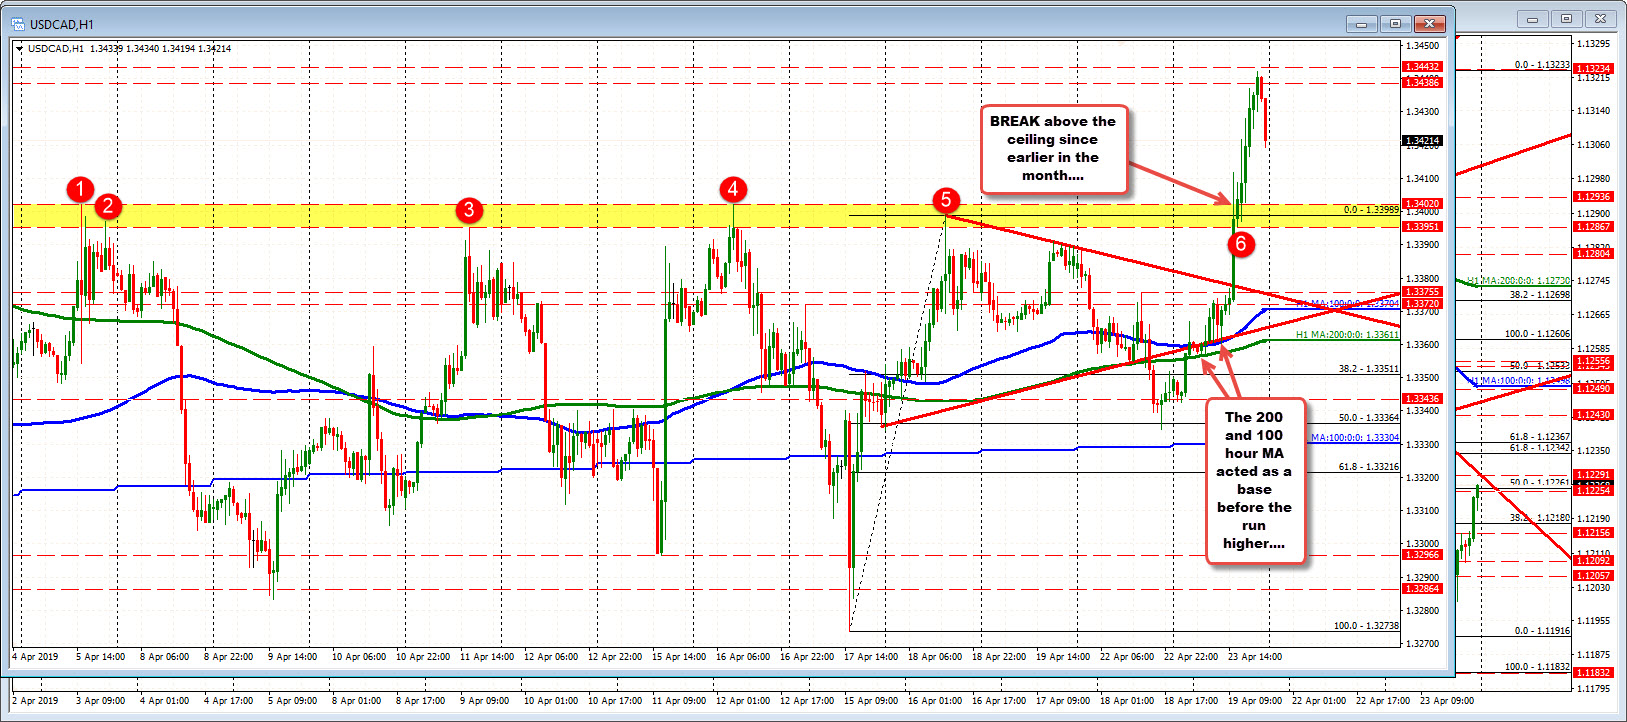 The USDCAD broke above its ceiling which helped the techncal bias today